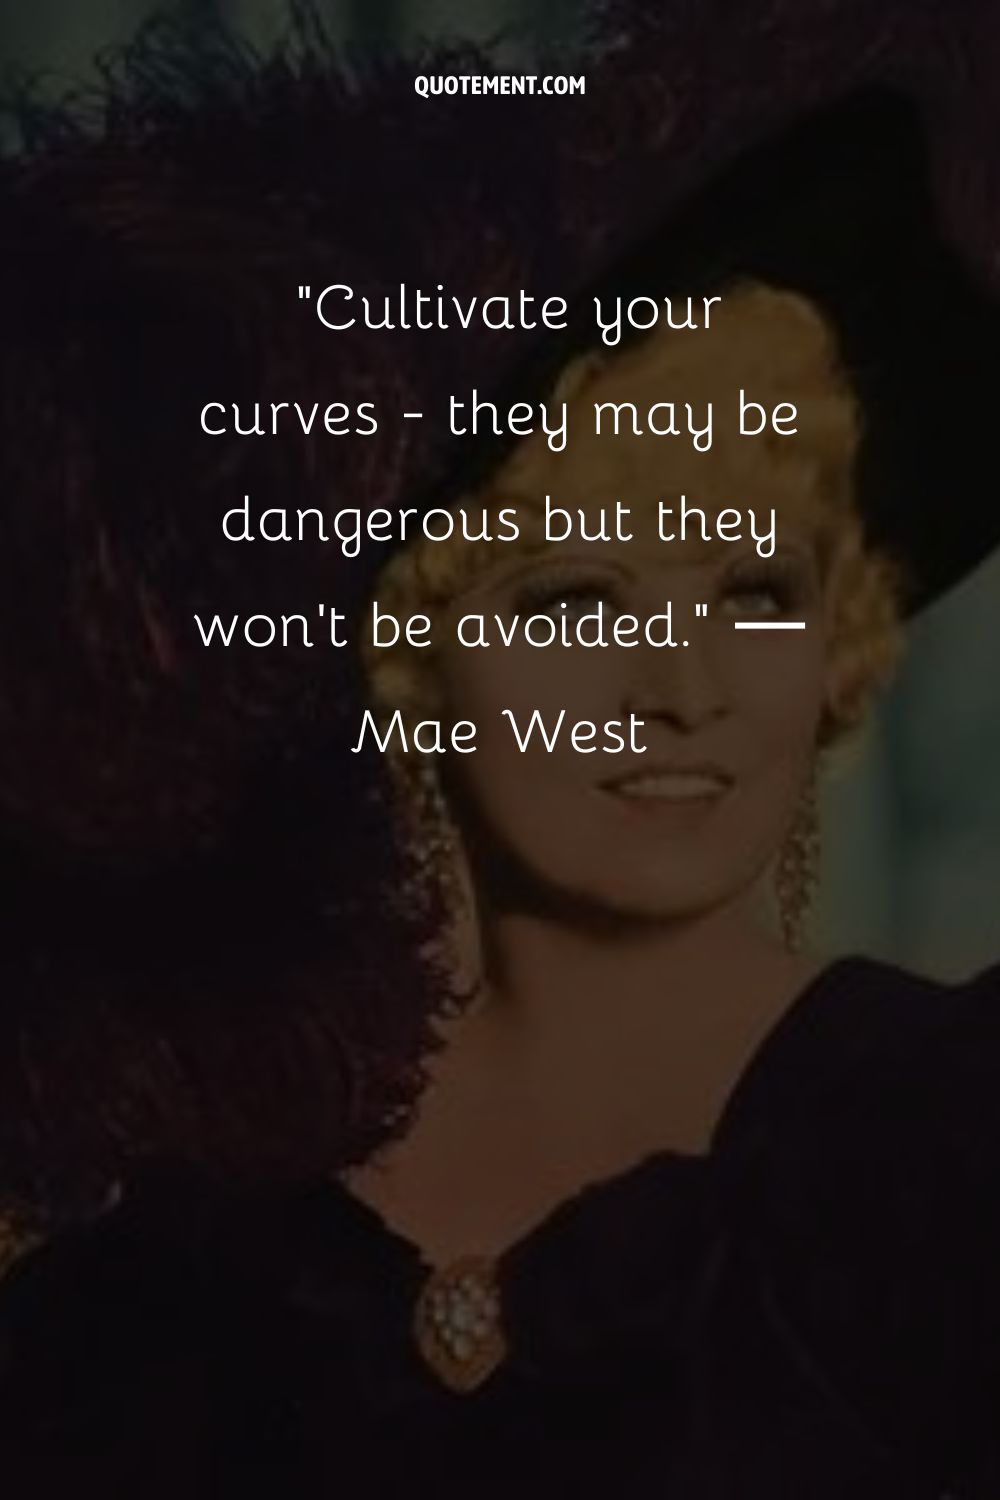 Cultivate your curves - they may be dangerous but they won't be avoided